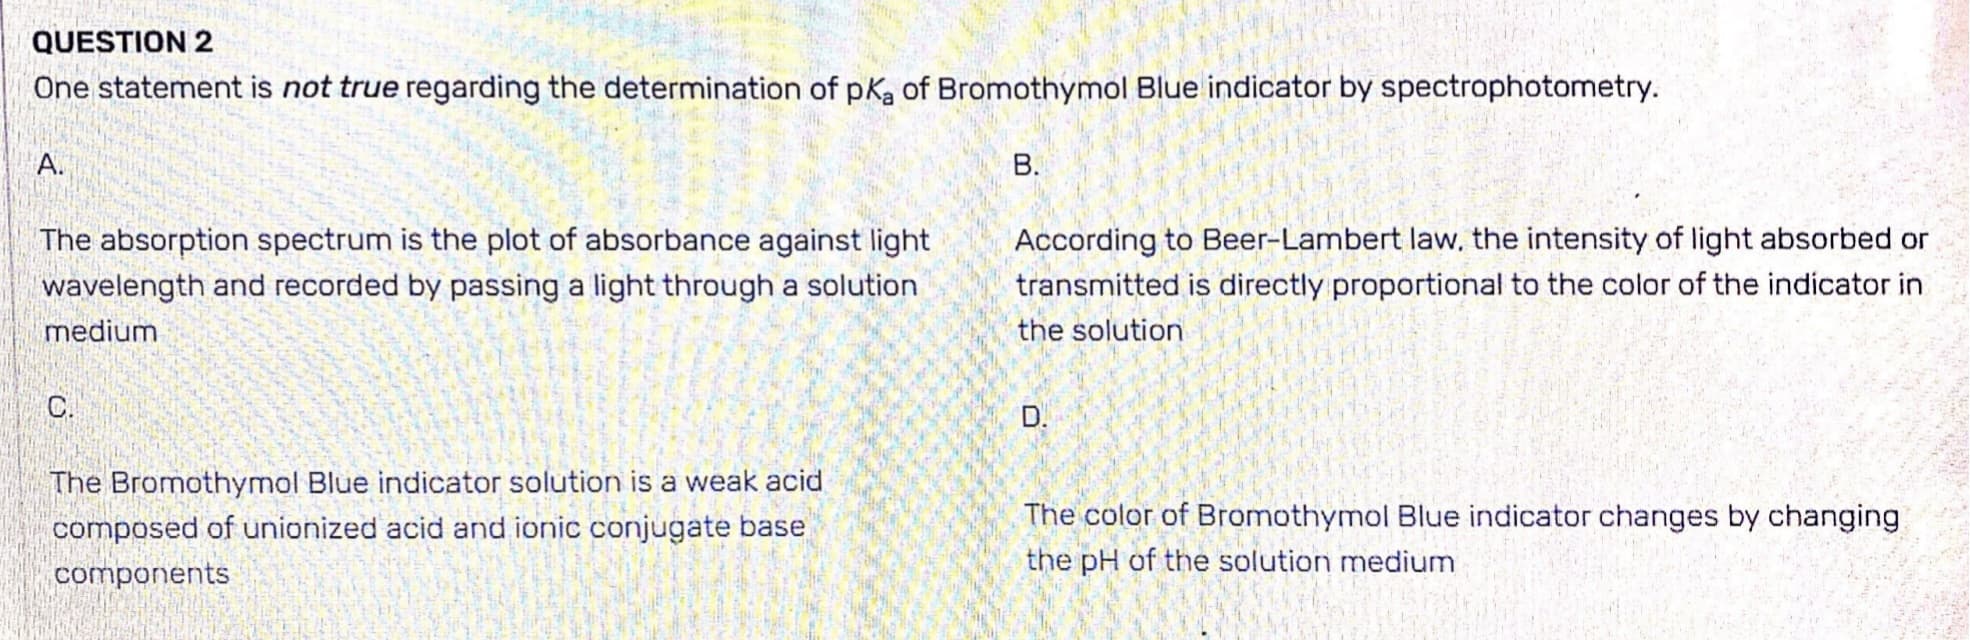 QUESTION 2
One statement is not true regarding the determination of pKa of Bromothymol Blue indicator by spectrophotometry.
A.
The absorption spectrum is the plot of absorbance against light
wavelength and recorded by passing a light through a solution
medium
C.
The Bromothymol Blue indicator solution is a weak acid
composed of unionized acid and ionic conjugate base
components
B.
According to Beer-Lambert law, the intensity of light absorbed or
transmitted is directly proportional to the color of the indicator in
the solution
D.
The color of Bromothymol Blue indicator changes by changing
the pH of the solution medium